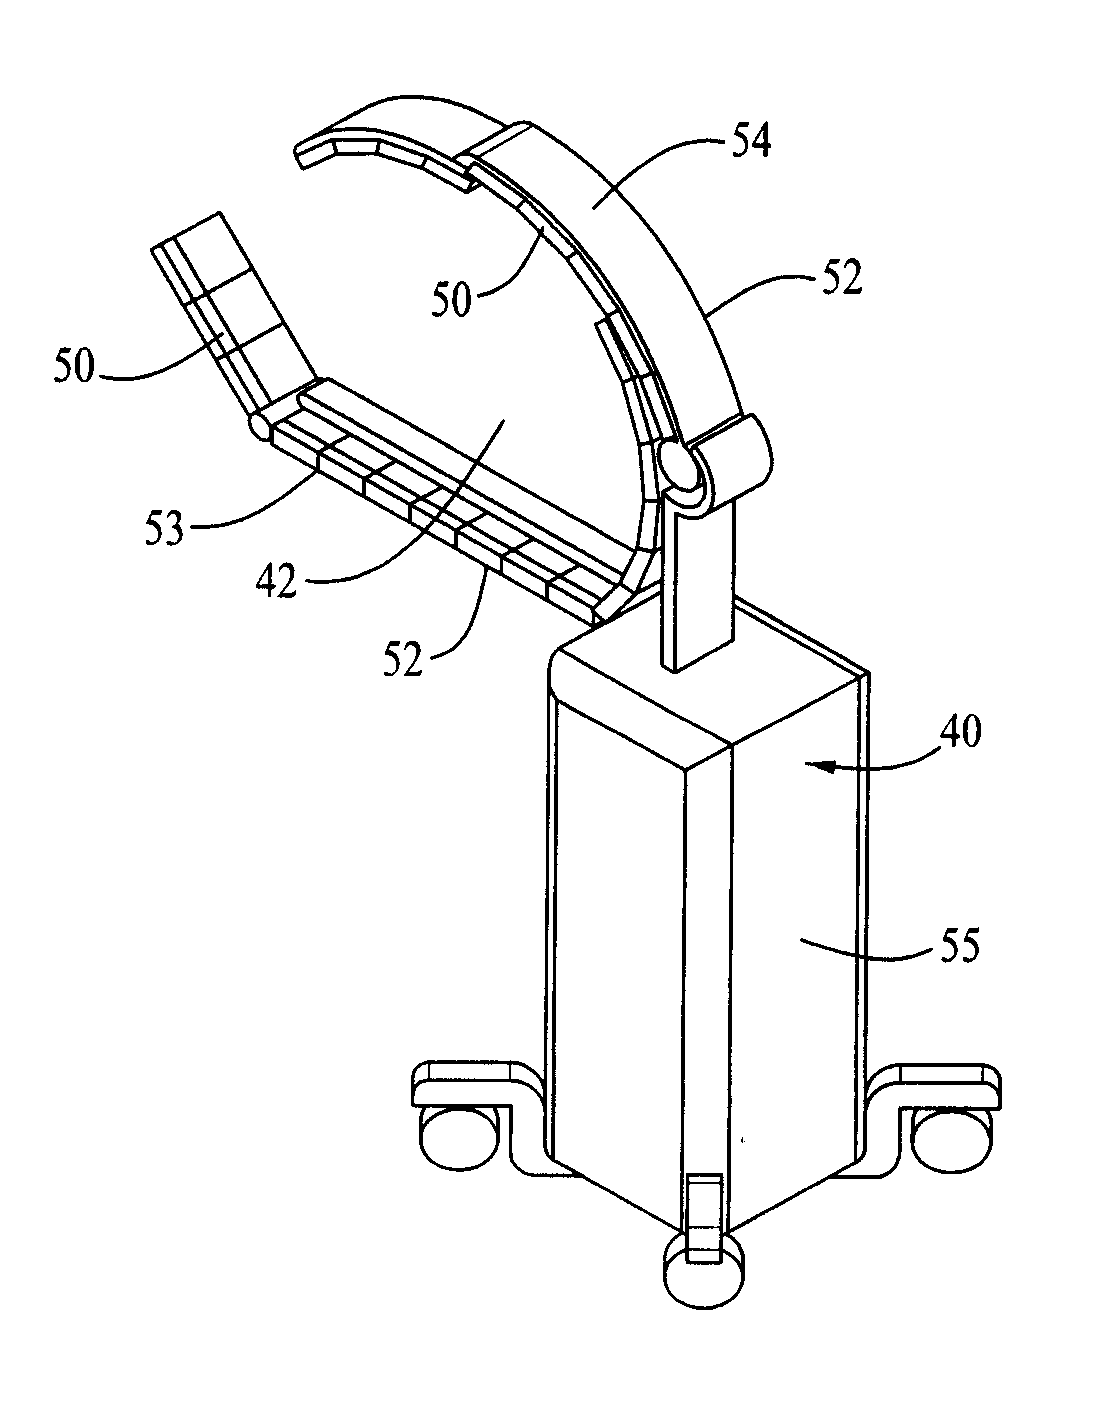 Portable pet scanner for imaging of a portion of the body